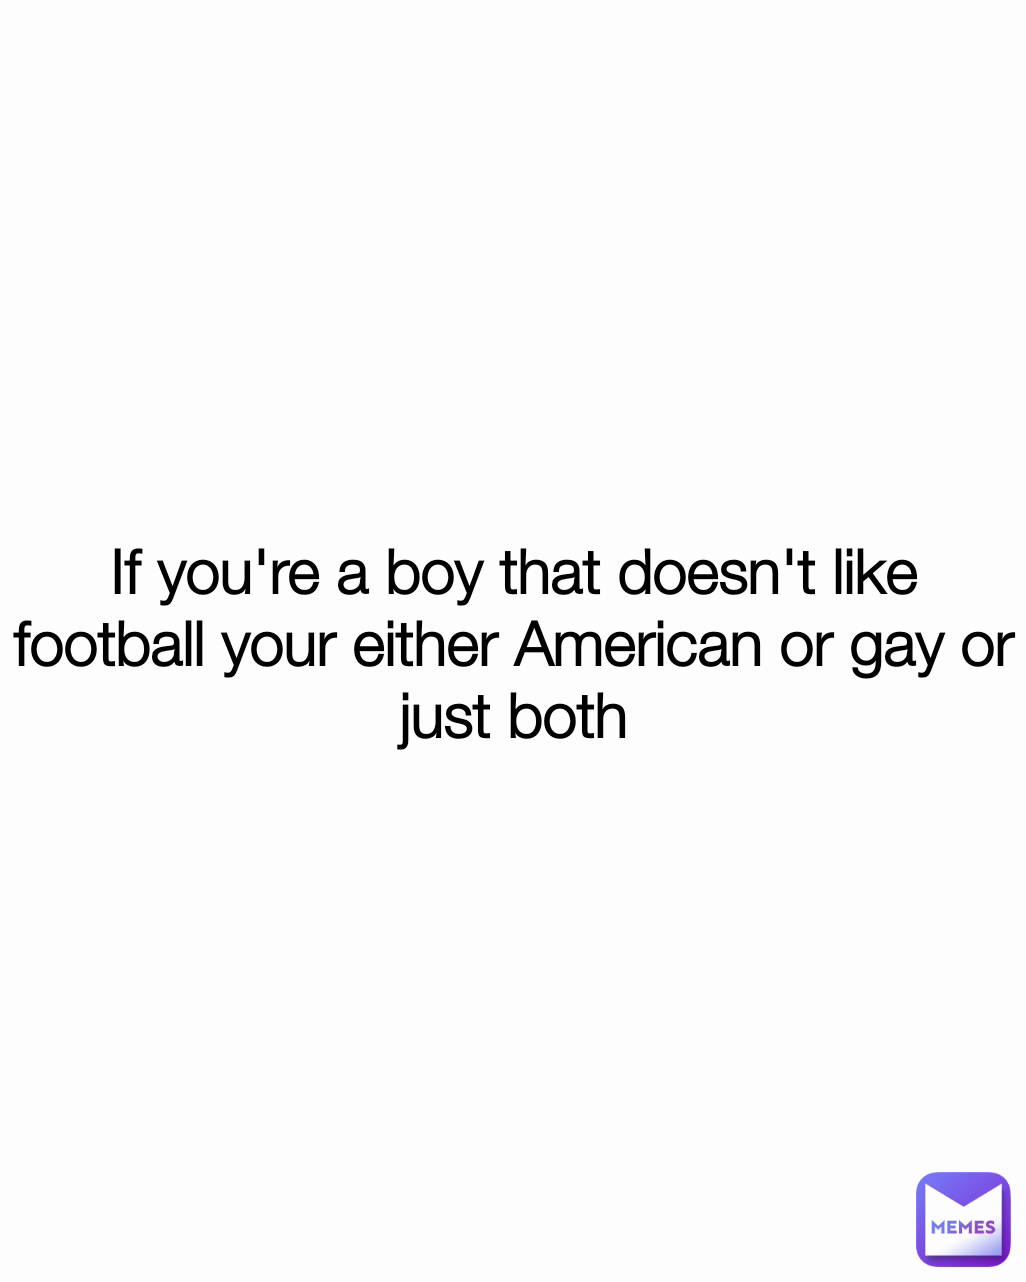 If you're a boy that doesn't like football your either American or gay or just both